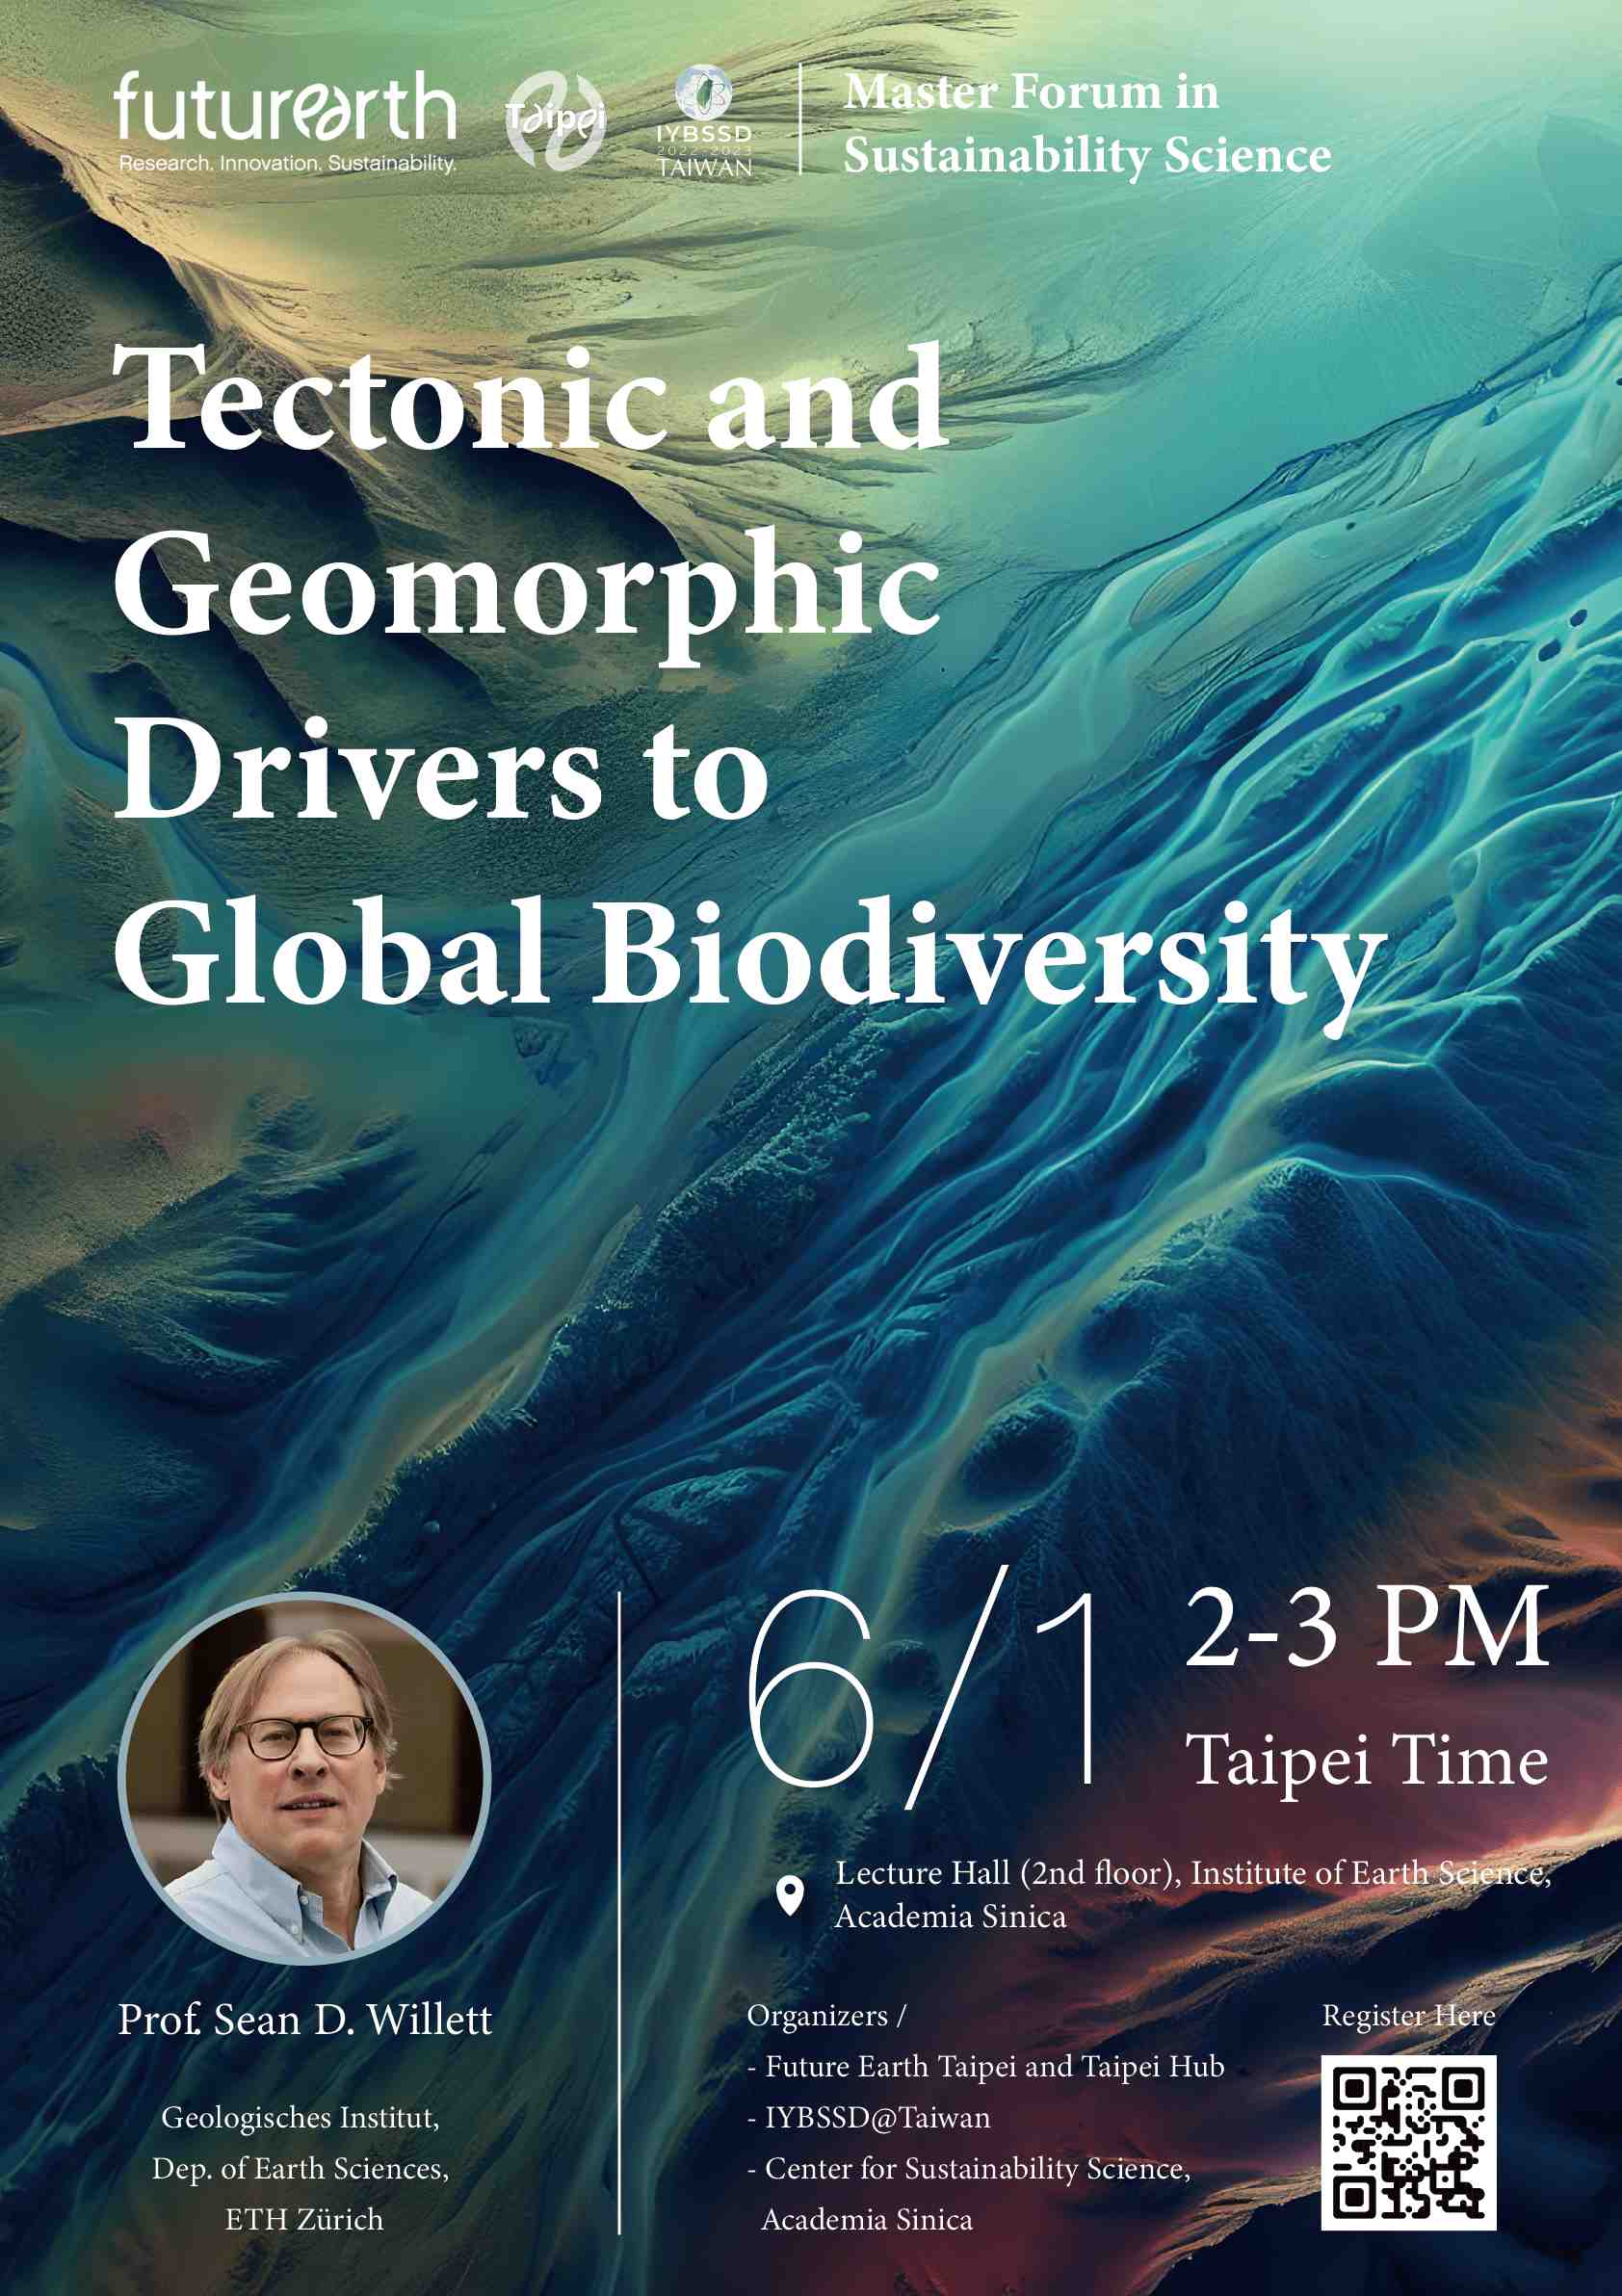 ✸ ???????????????????????? ???????????????????? ???????? ???????????????????????????????????????????????????????? ???????????????????????????? ✸ Tectonic and Geomorphic Drivers to Global Biodiversity Promotional Graphics or Posters